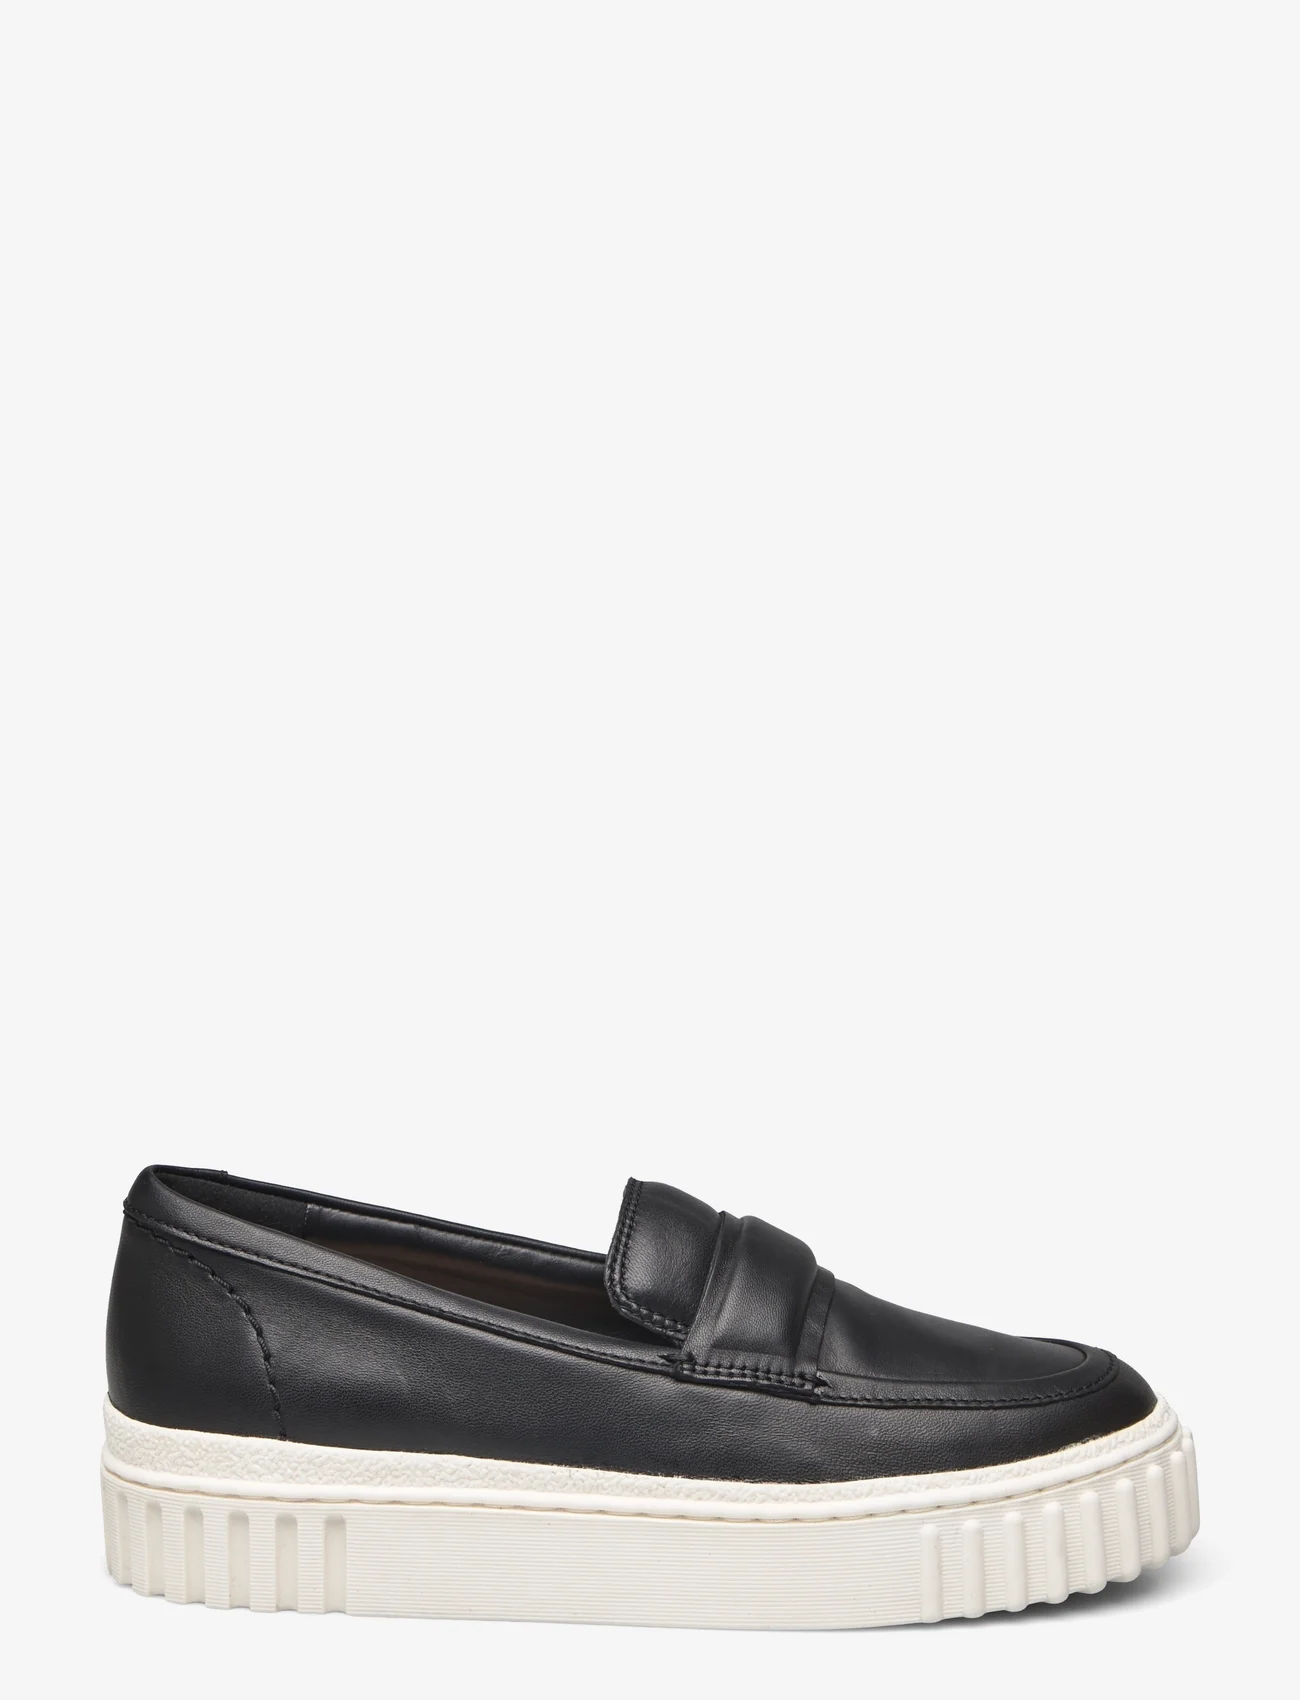 Clarks - Mayhill Cove D - loafers - 1216 black leather - 1